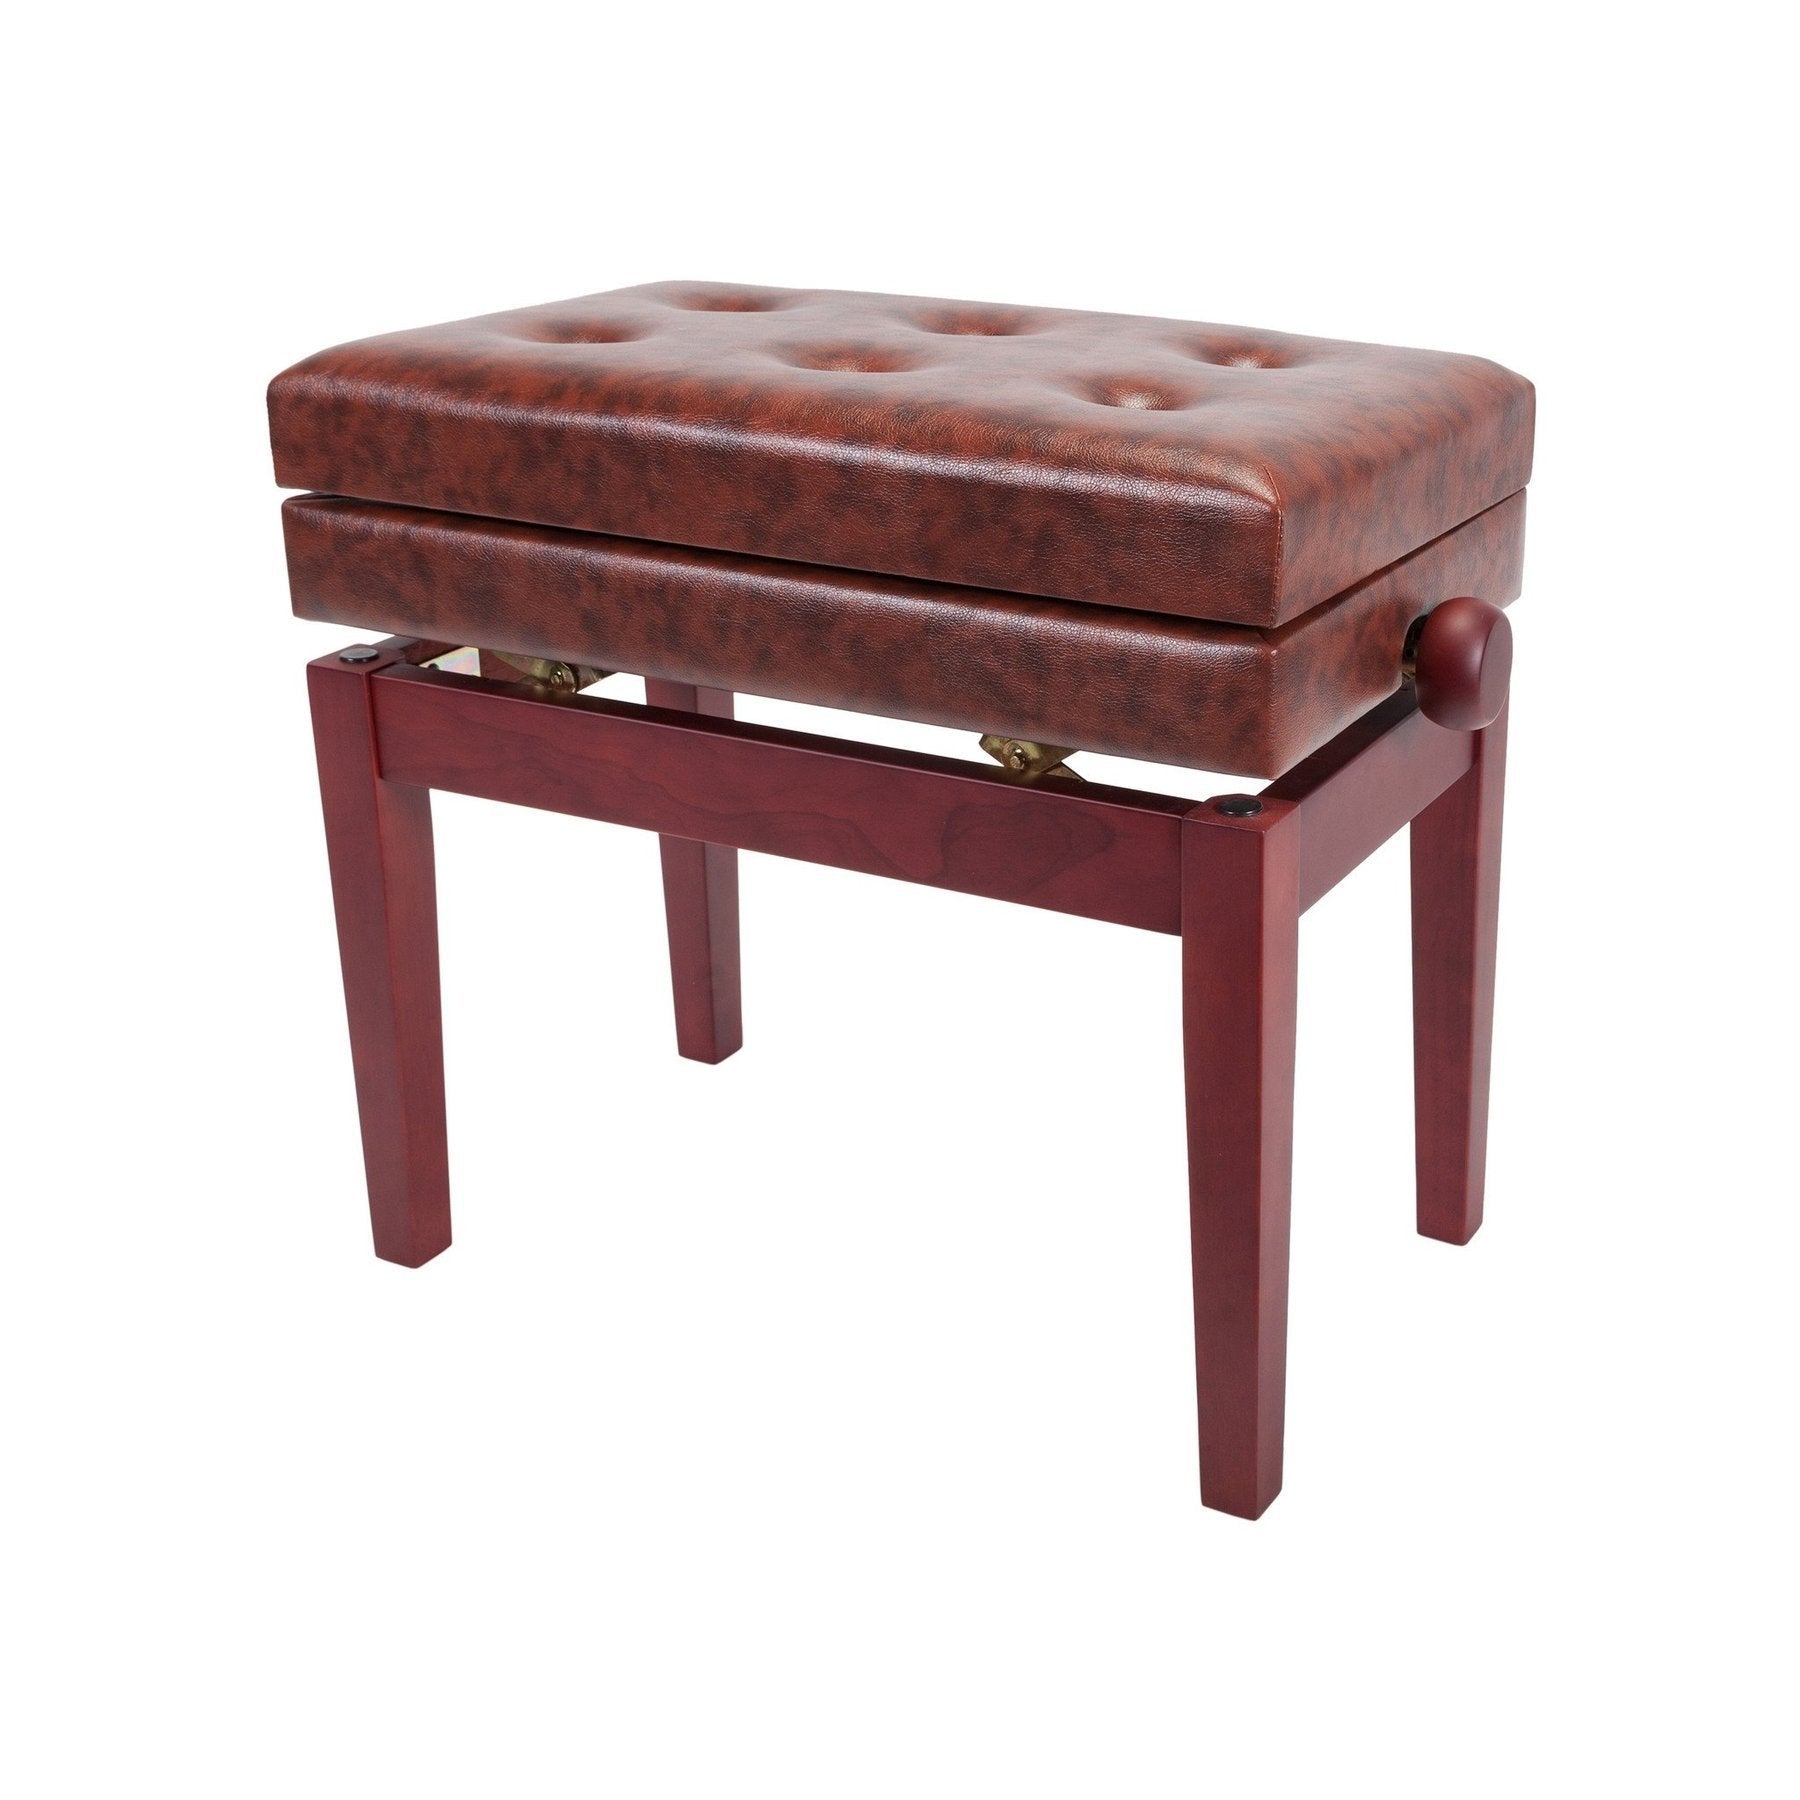 Crown Deluxe Tufted Height Adjustable Piano Stool with Storage Compartment (Mahogany)-CPS-6AS-MAH